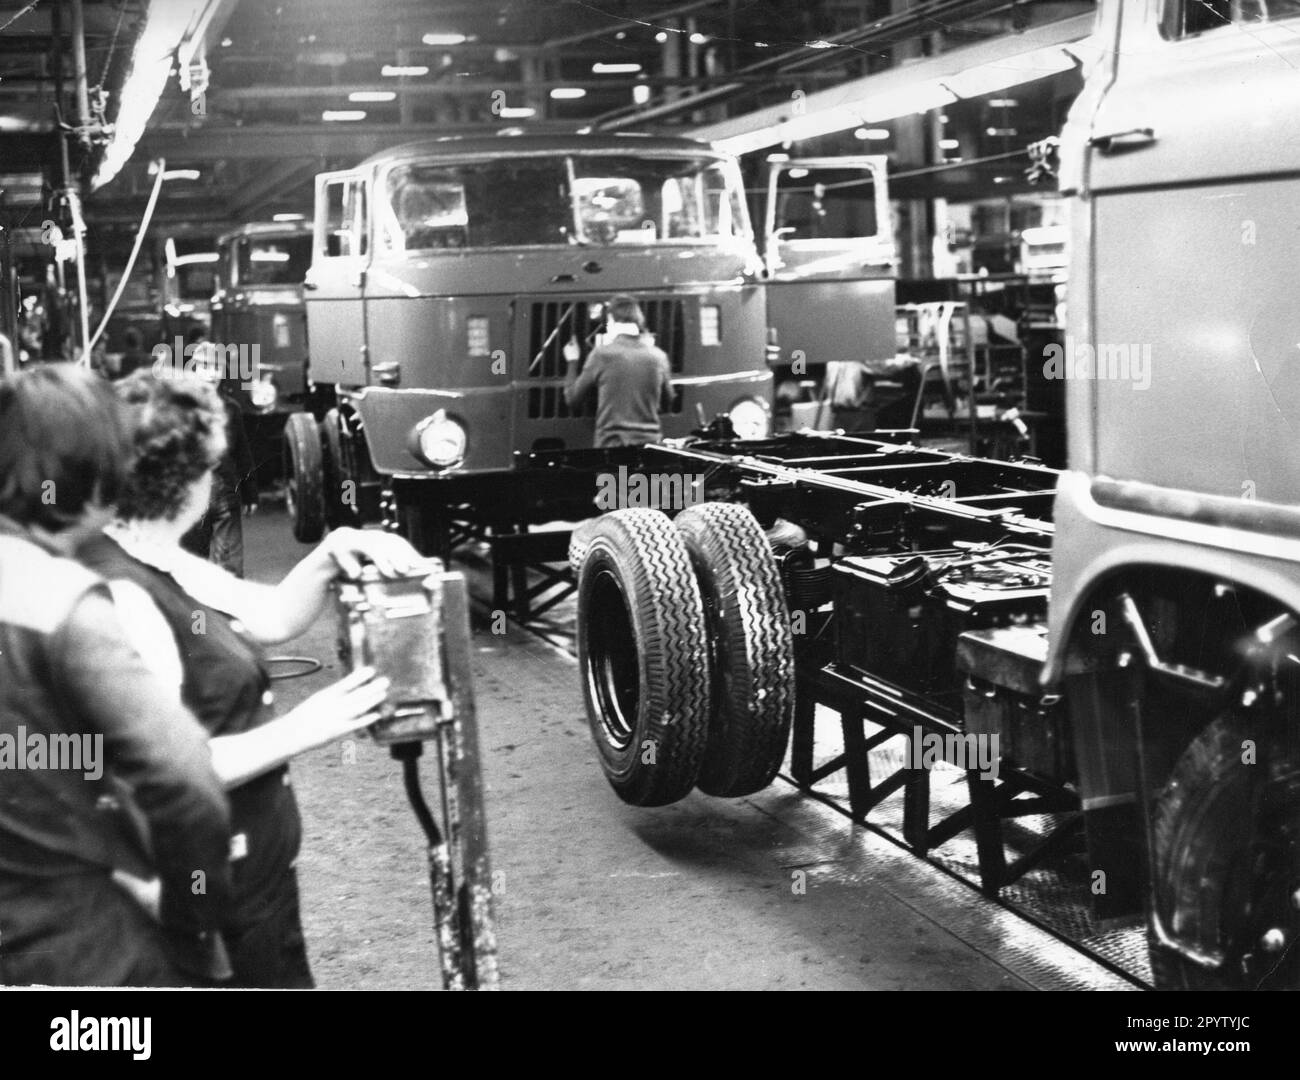 Assembly line for W50 truck at IFA Autowerk Ludwigsfelde.W50 truck. GDR factories. Photo: MAZ/Christel Köster,02.01.1980 [automated translation] Stock Photo